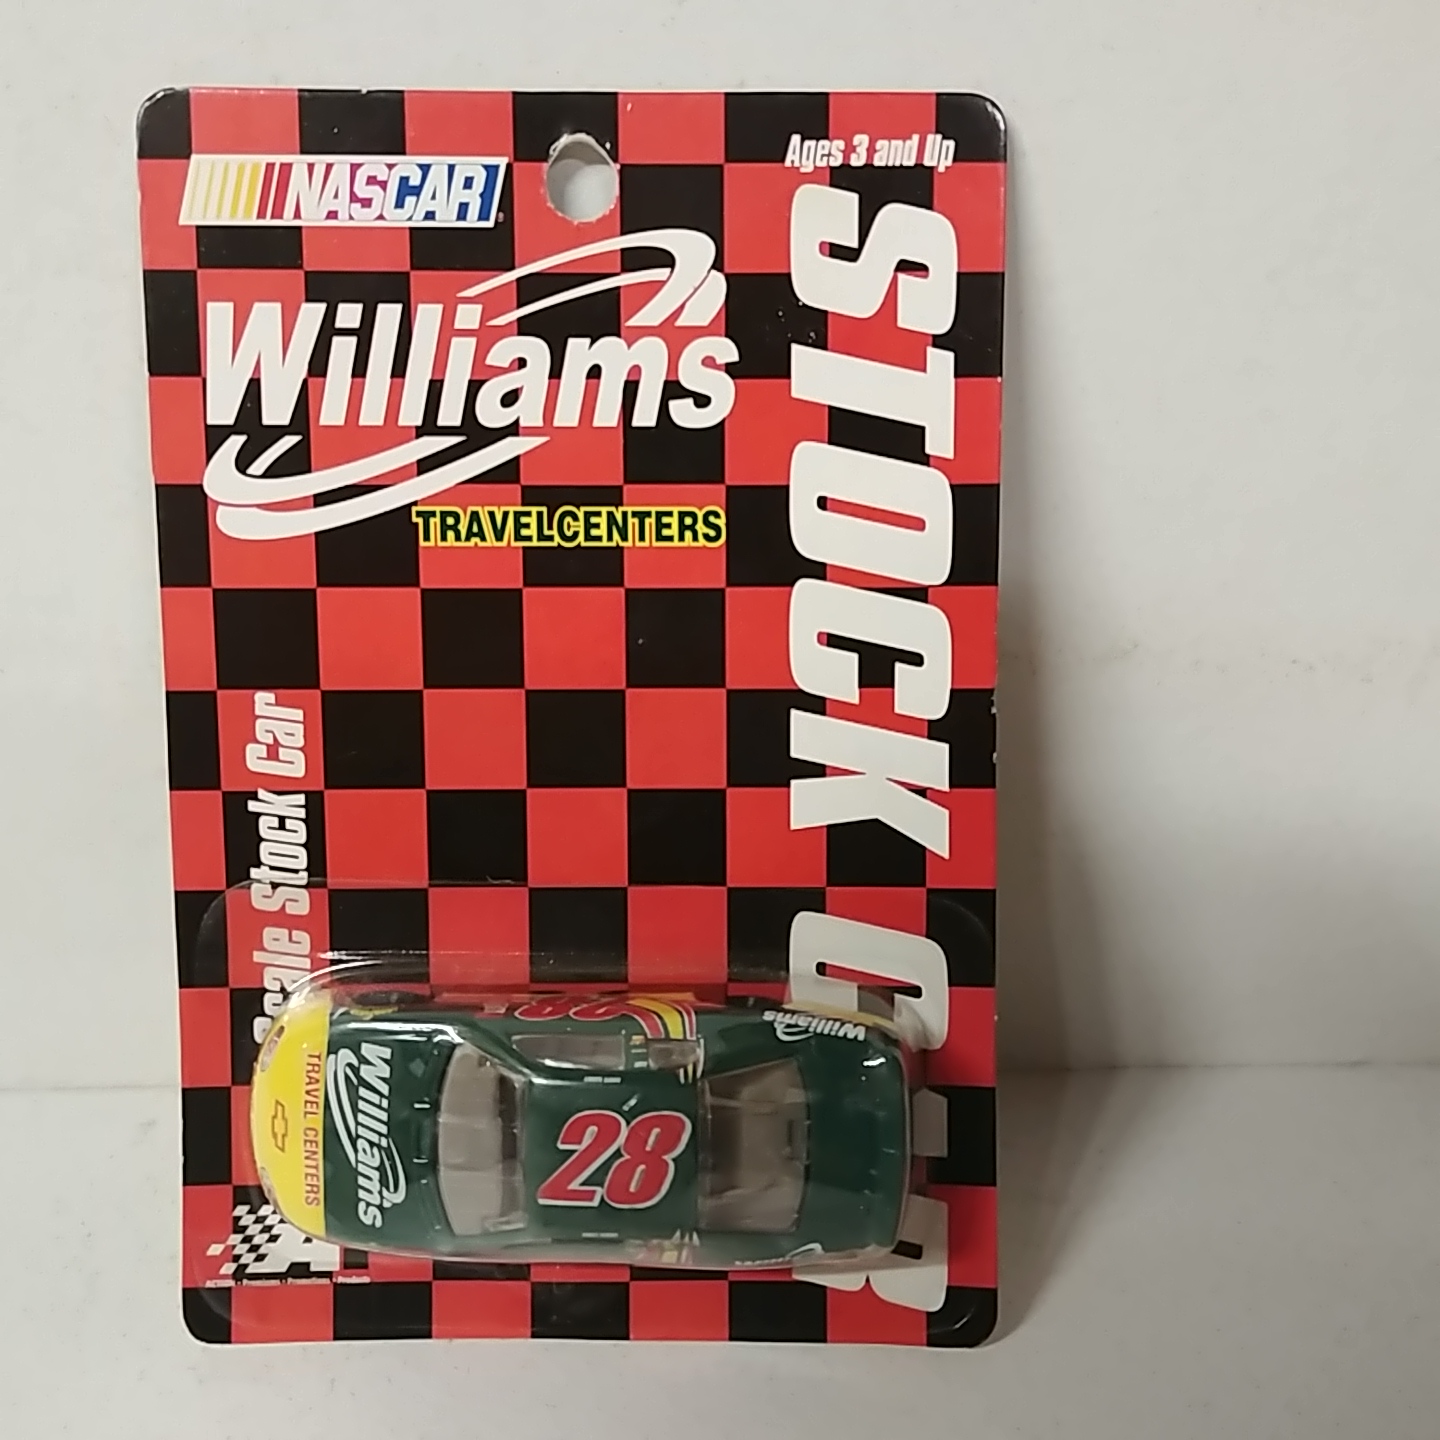 1999 Andy Kirby 1/64th Williams Travel Centers Monte Carlo